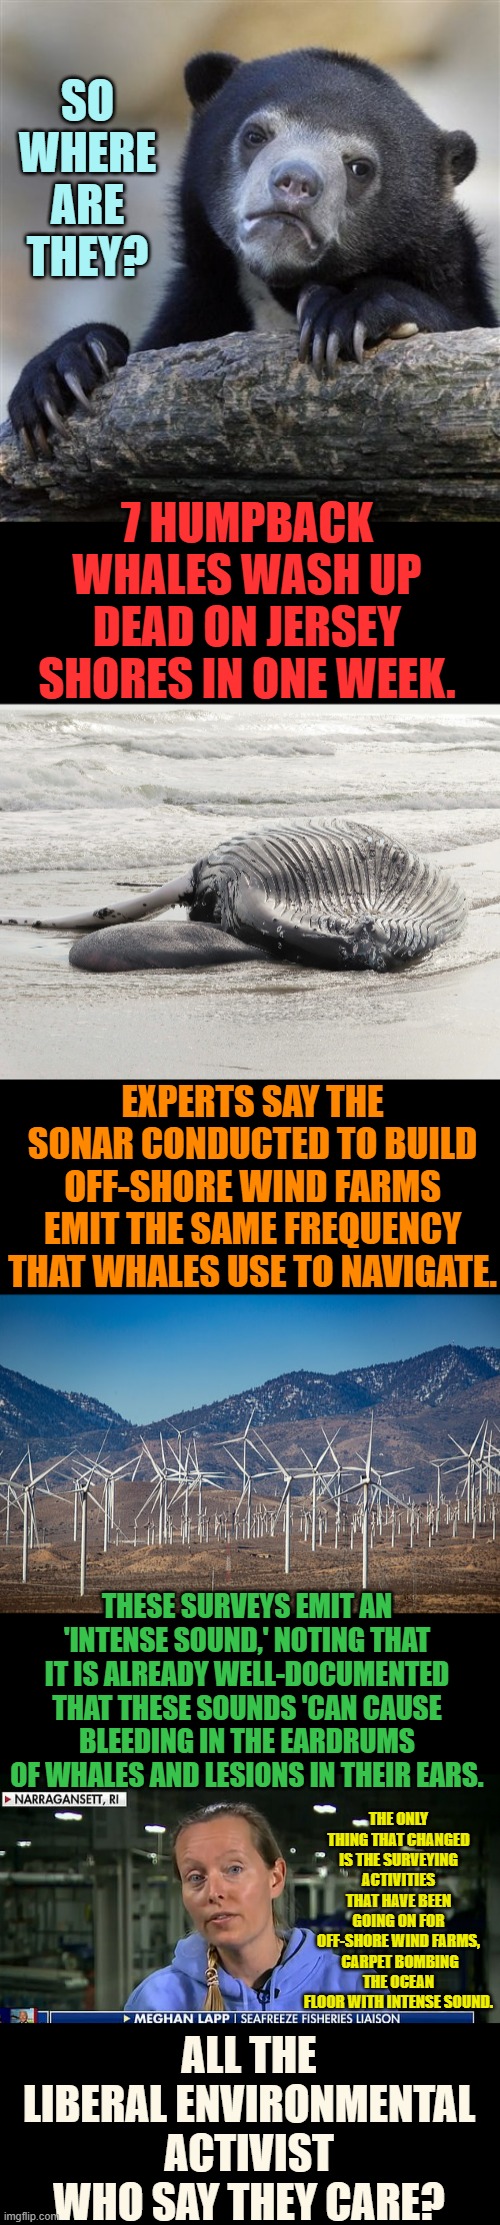 It's So Sad...But We All Know It's All About The Money | SO WHERE ARE THEY? 7 HUMPBACK WHALES WASH UP DEAD ON JERSEY SHORES IN ONE WEEK. EXPERTS SAY THE SONAR CONDUCTED TO BUILD OFF-SHORE WIND FARMS EMIT THE SAME FREQUENCY THAT WHALES USE TO NAVIGATE. THESE SURVEYS EMIT AN 'INTENSE SOUND,' NOTING THAT IT IS ALREADY WELL-DOCUMENTED THAT THESE SOUNDS 'CAN CAUSE BLEEDING IN THE EARDRUMS OF WHALES AND LESIONS IN THEIR EARS. THE ONLY THING THAT CHANGED IS THE SURVEYING ACTIVITIES THAT HAVE BEEN GOING ON FOR OFF-SHORE WIND FARMS,  CARPET BOMBING THE OCEAN FLOOR WITH INTENSE SOUND. ALL THE LIBERAL ENVIRONMENTAL ACTIVIST WHO SAY THEY CARE? | image tagged in memes,politics,whales,dying,environmental protection agency,where are they now | made w/ Imgflip meme maker